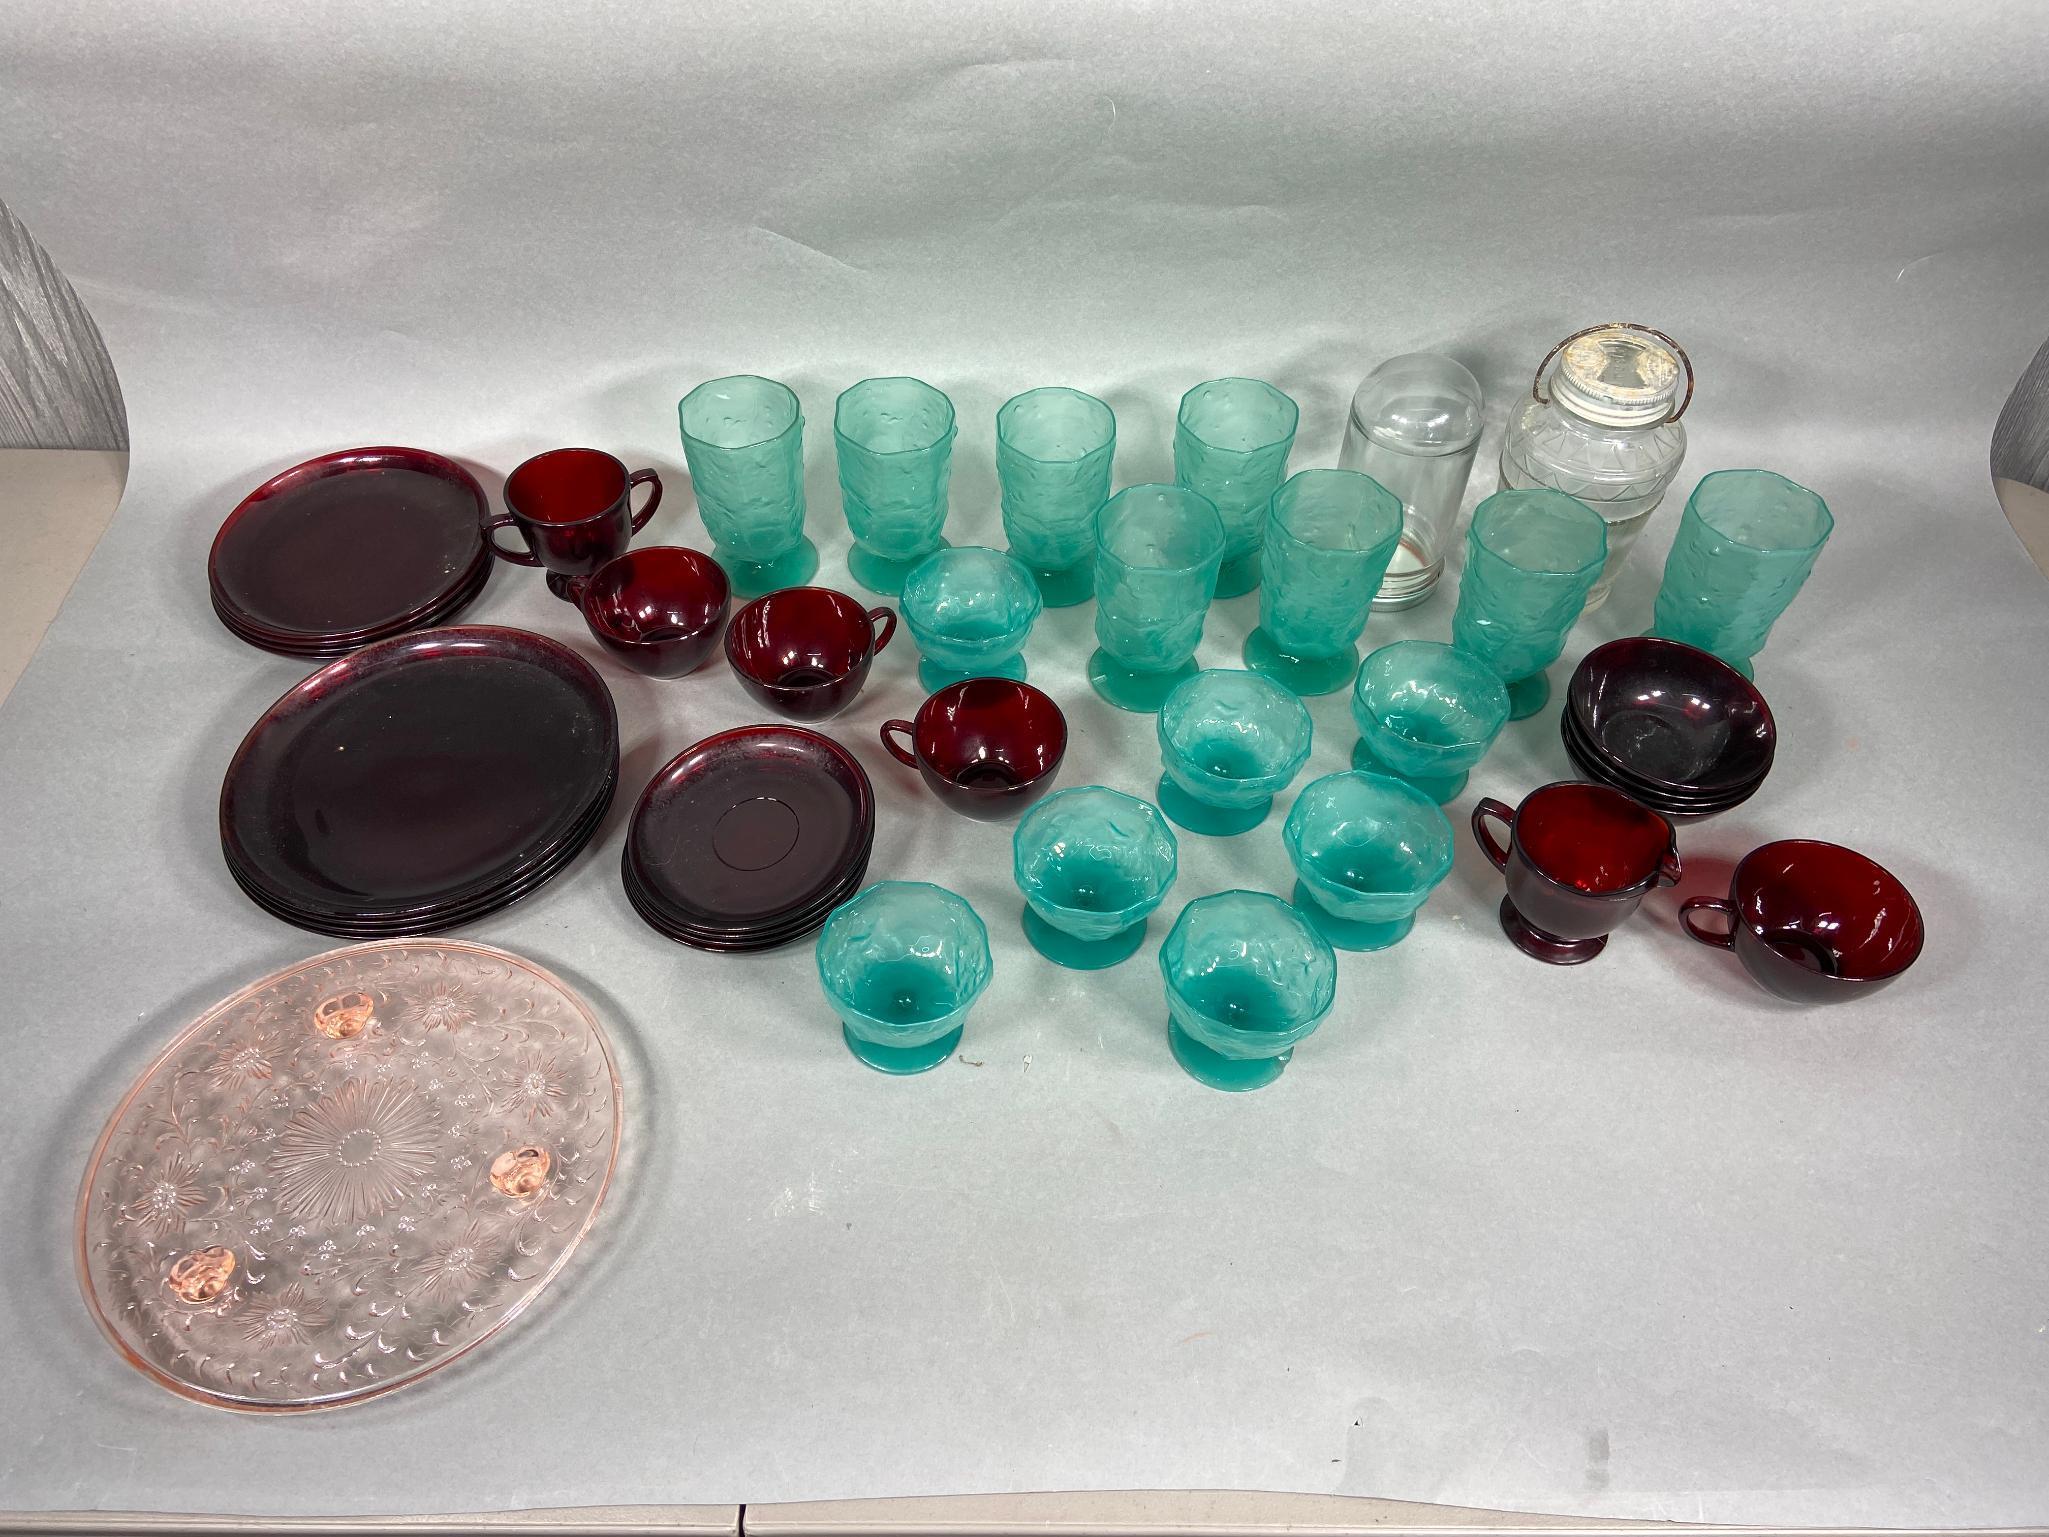 Lot of Glassware including Plates, Bowls, Cups and More